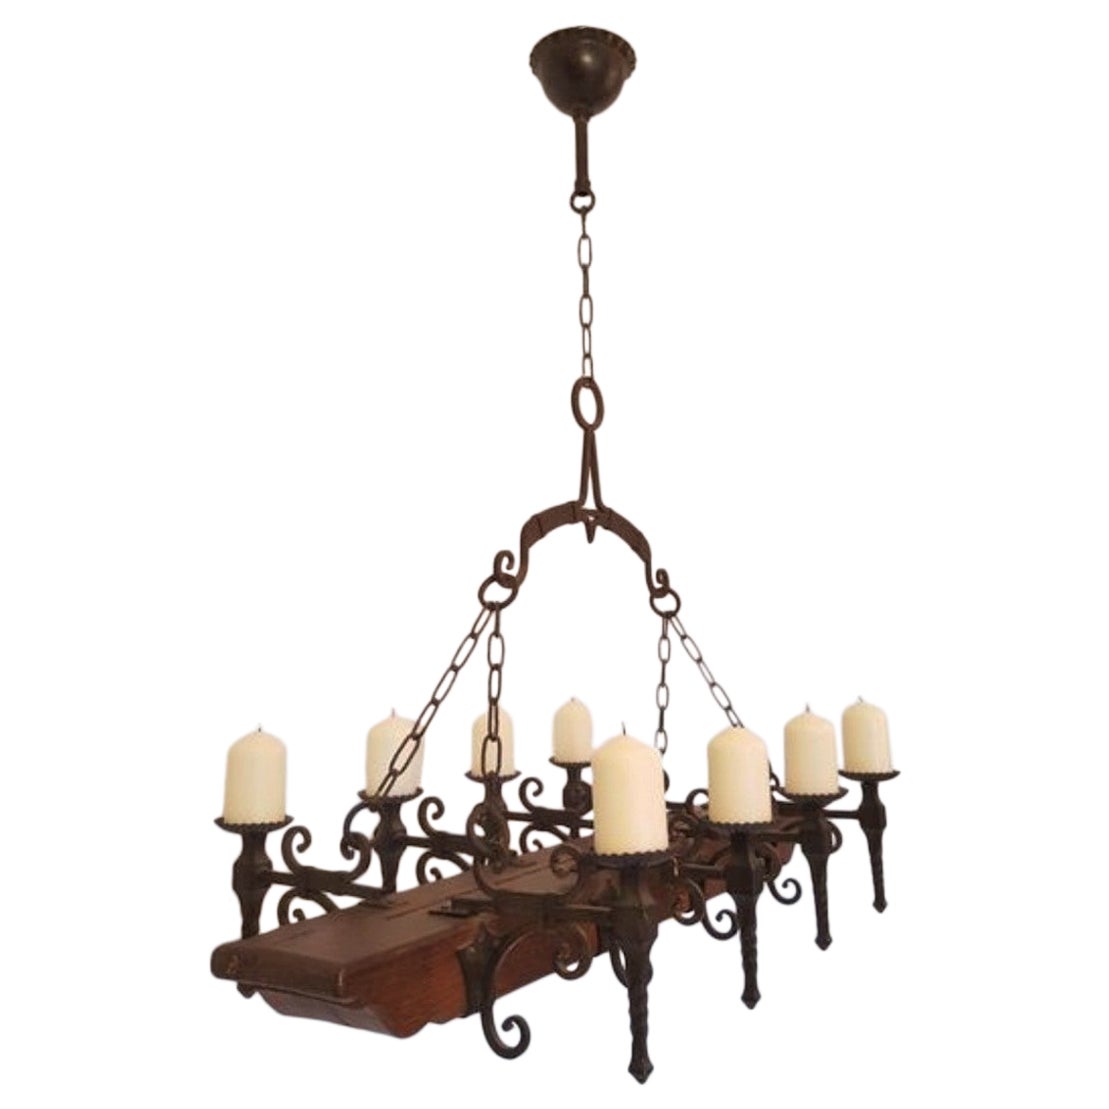 Spanish Handcrafted Forged Wrought Iron Oak Castle Chandelier, Mid-19th Century 